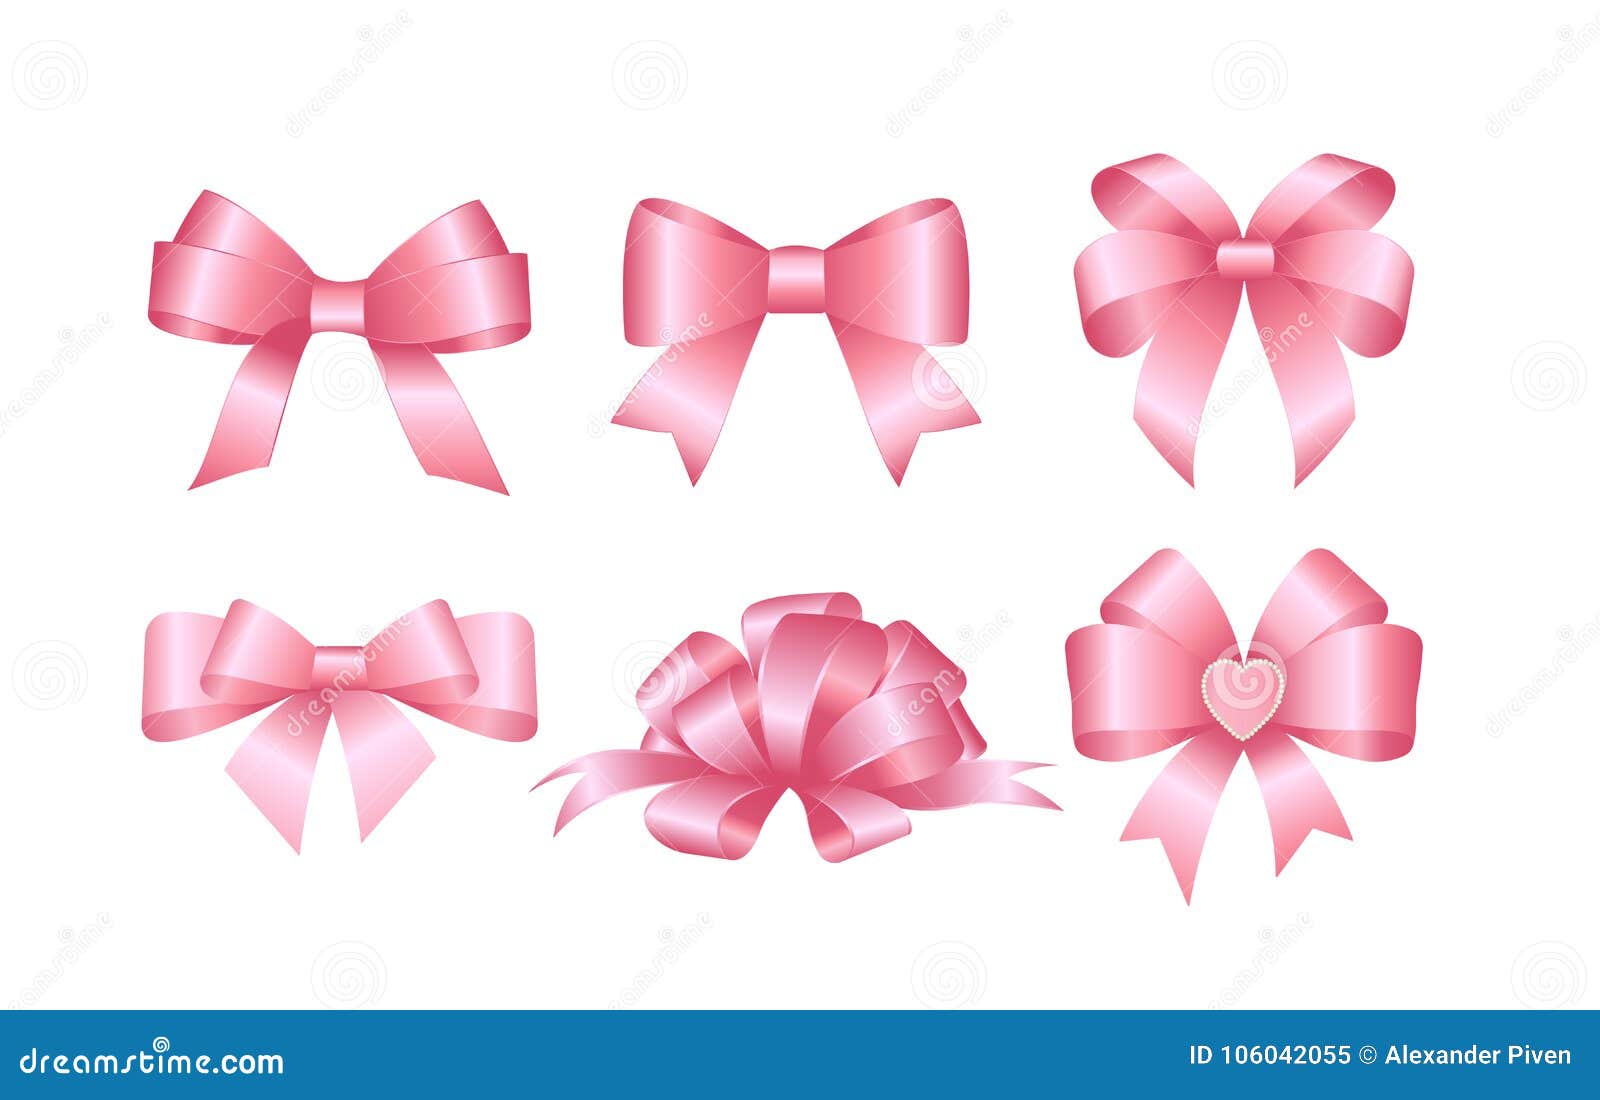 Set of Pink Gift Bows. Concept for Invitation, Banners, Gift Cards ...